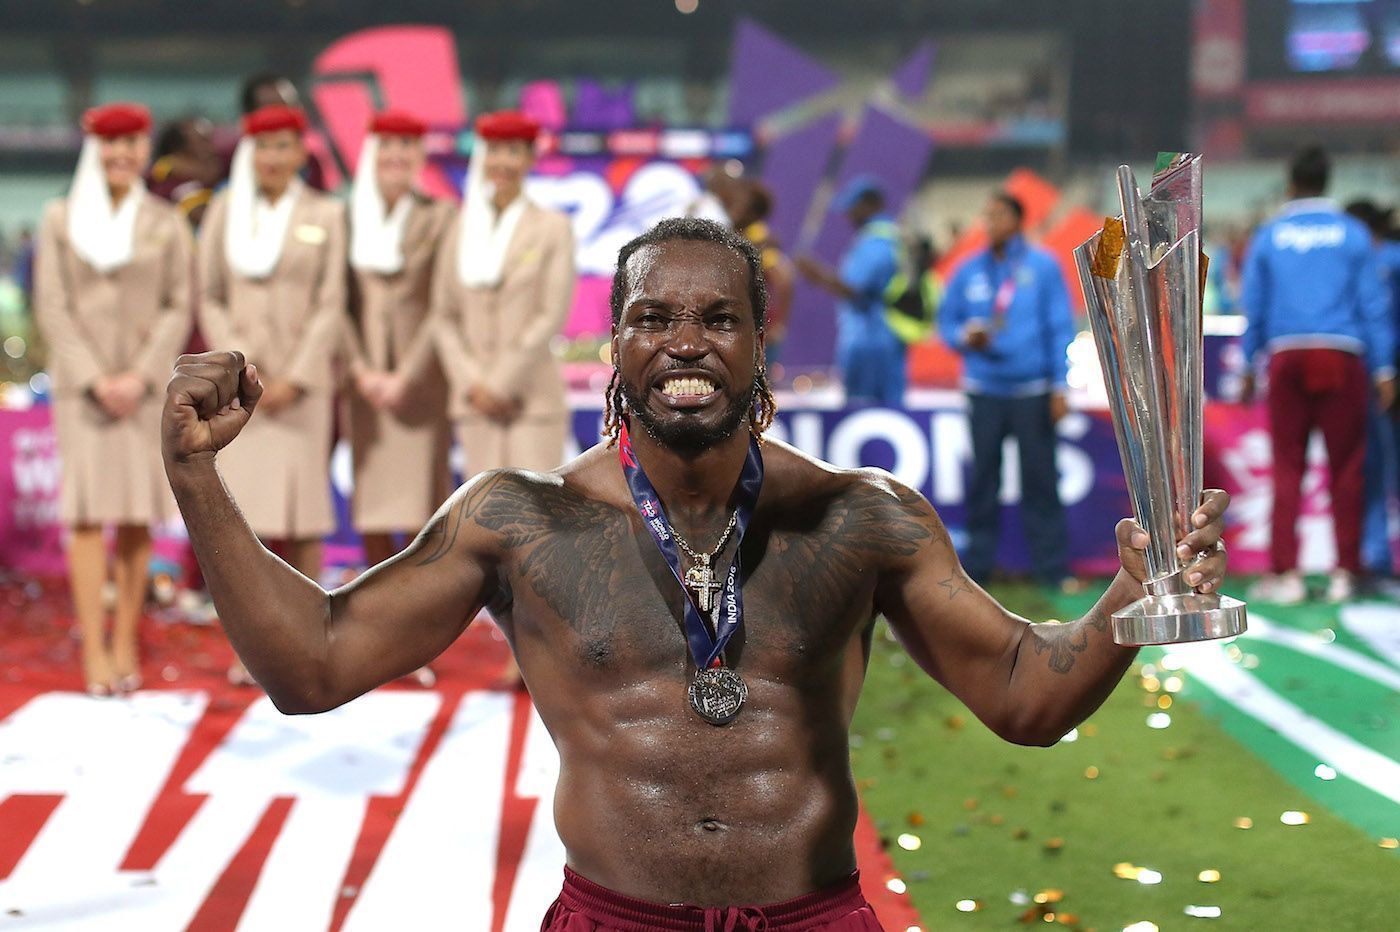 Age is just a number for Chris Gayle, who still has that firepower to dominate for an year or so